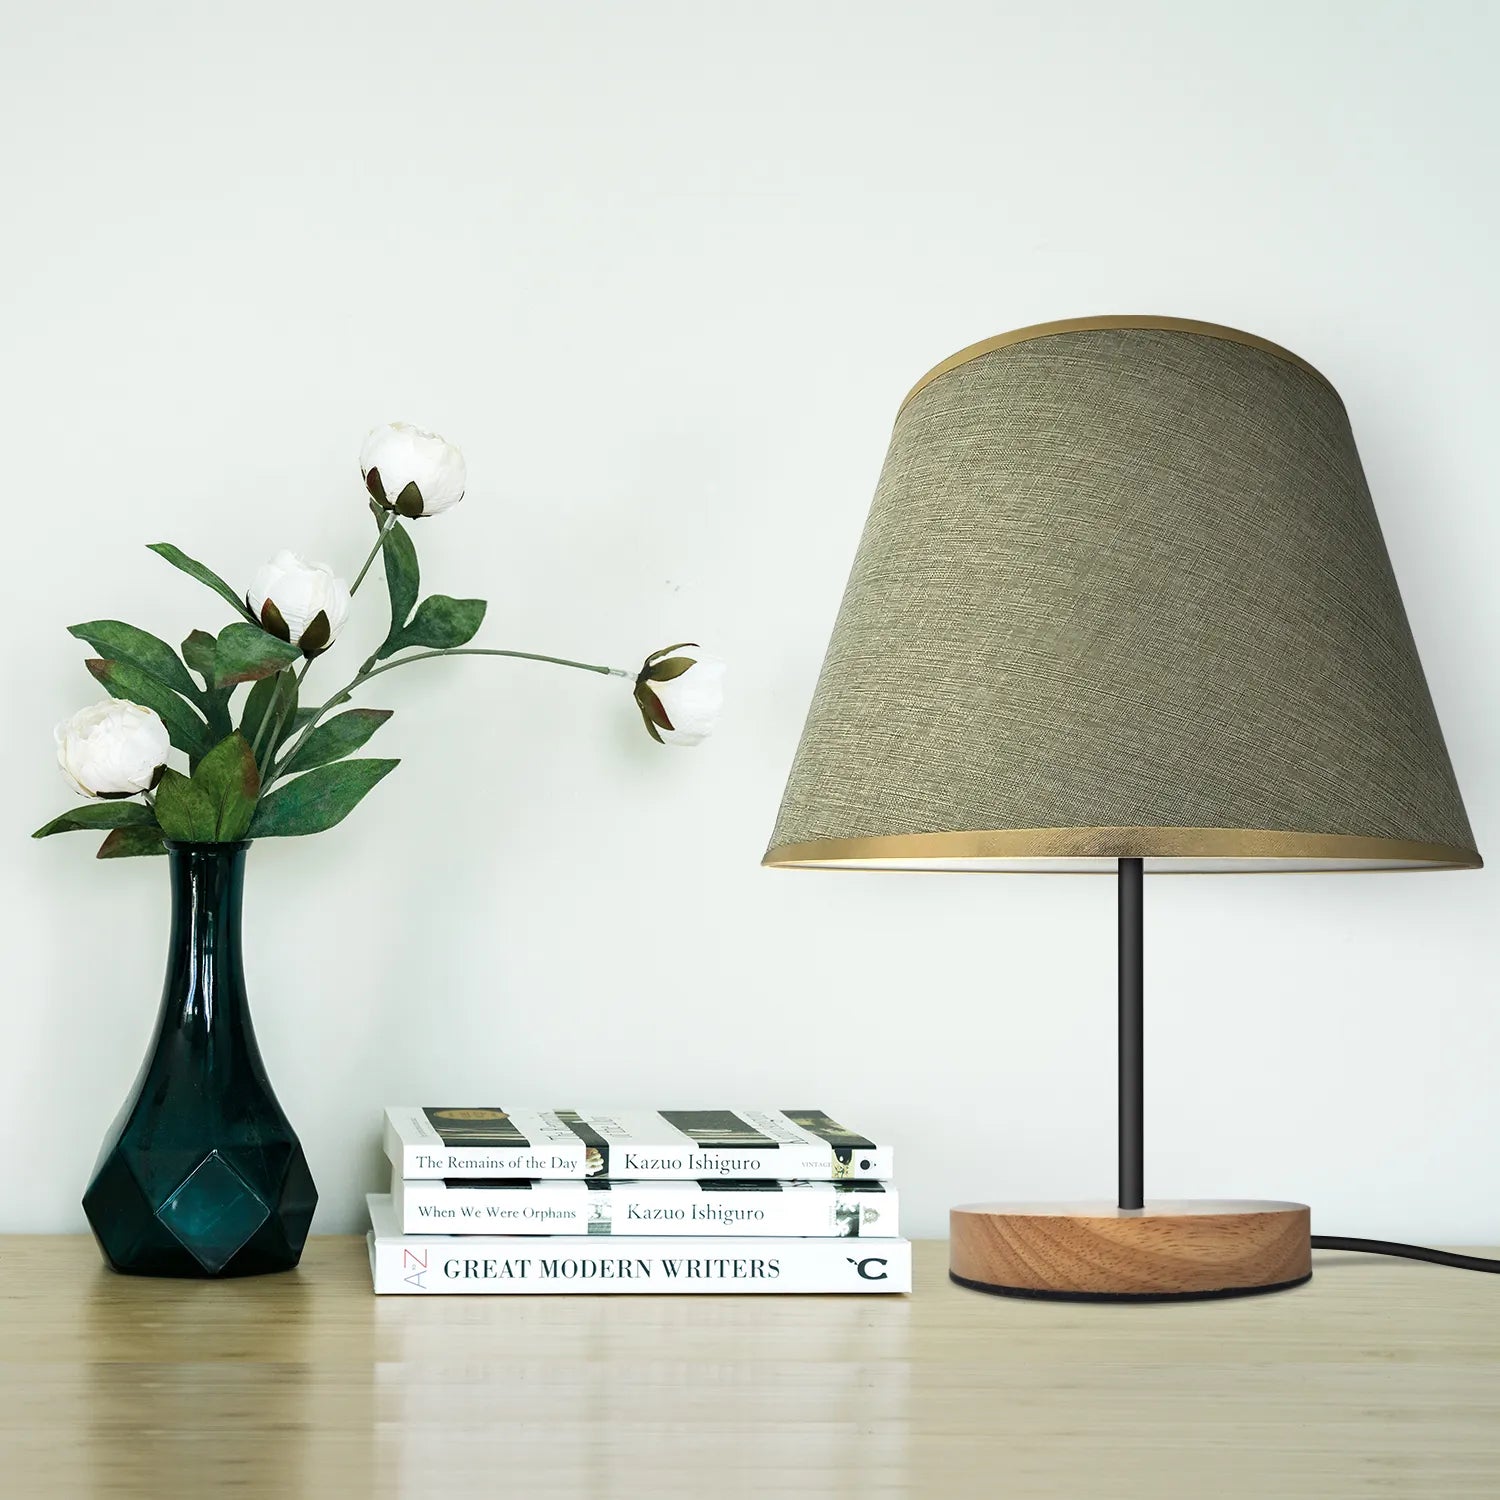 decorative coolie table Lamp for your Desk